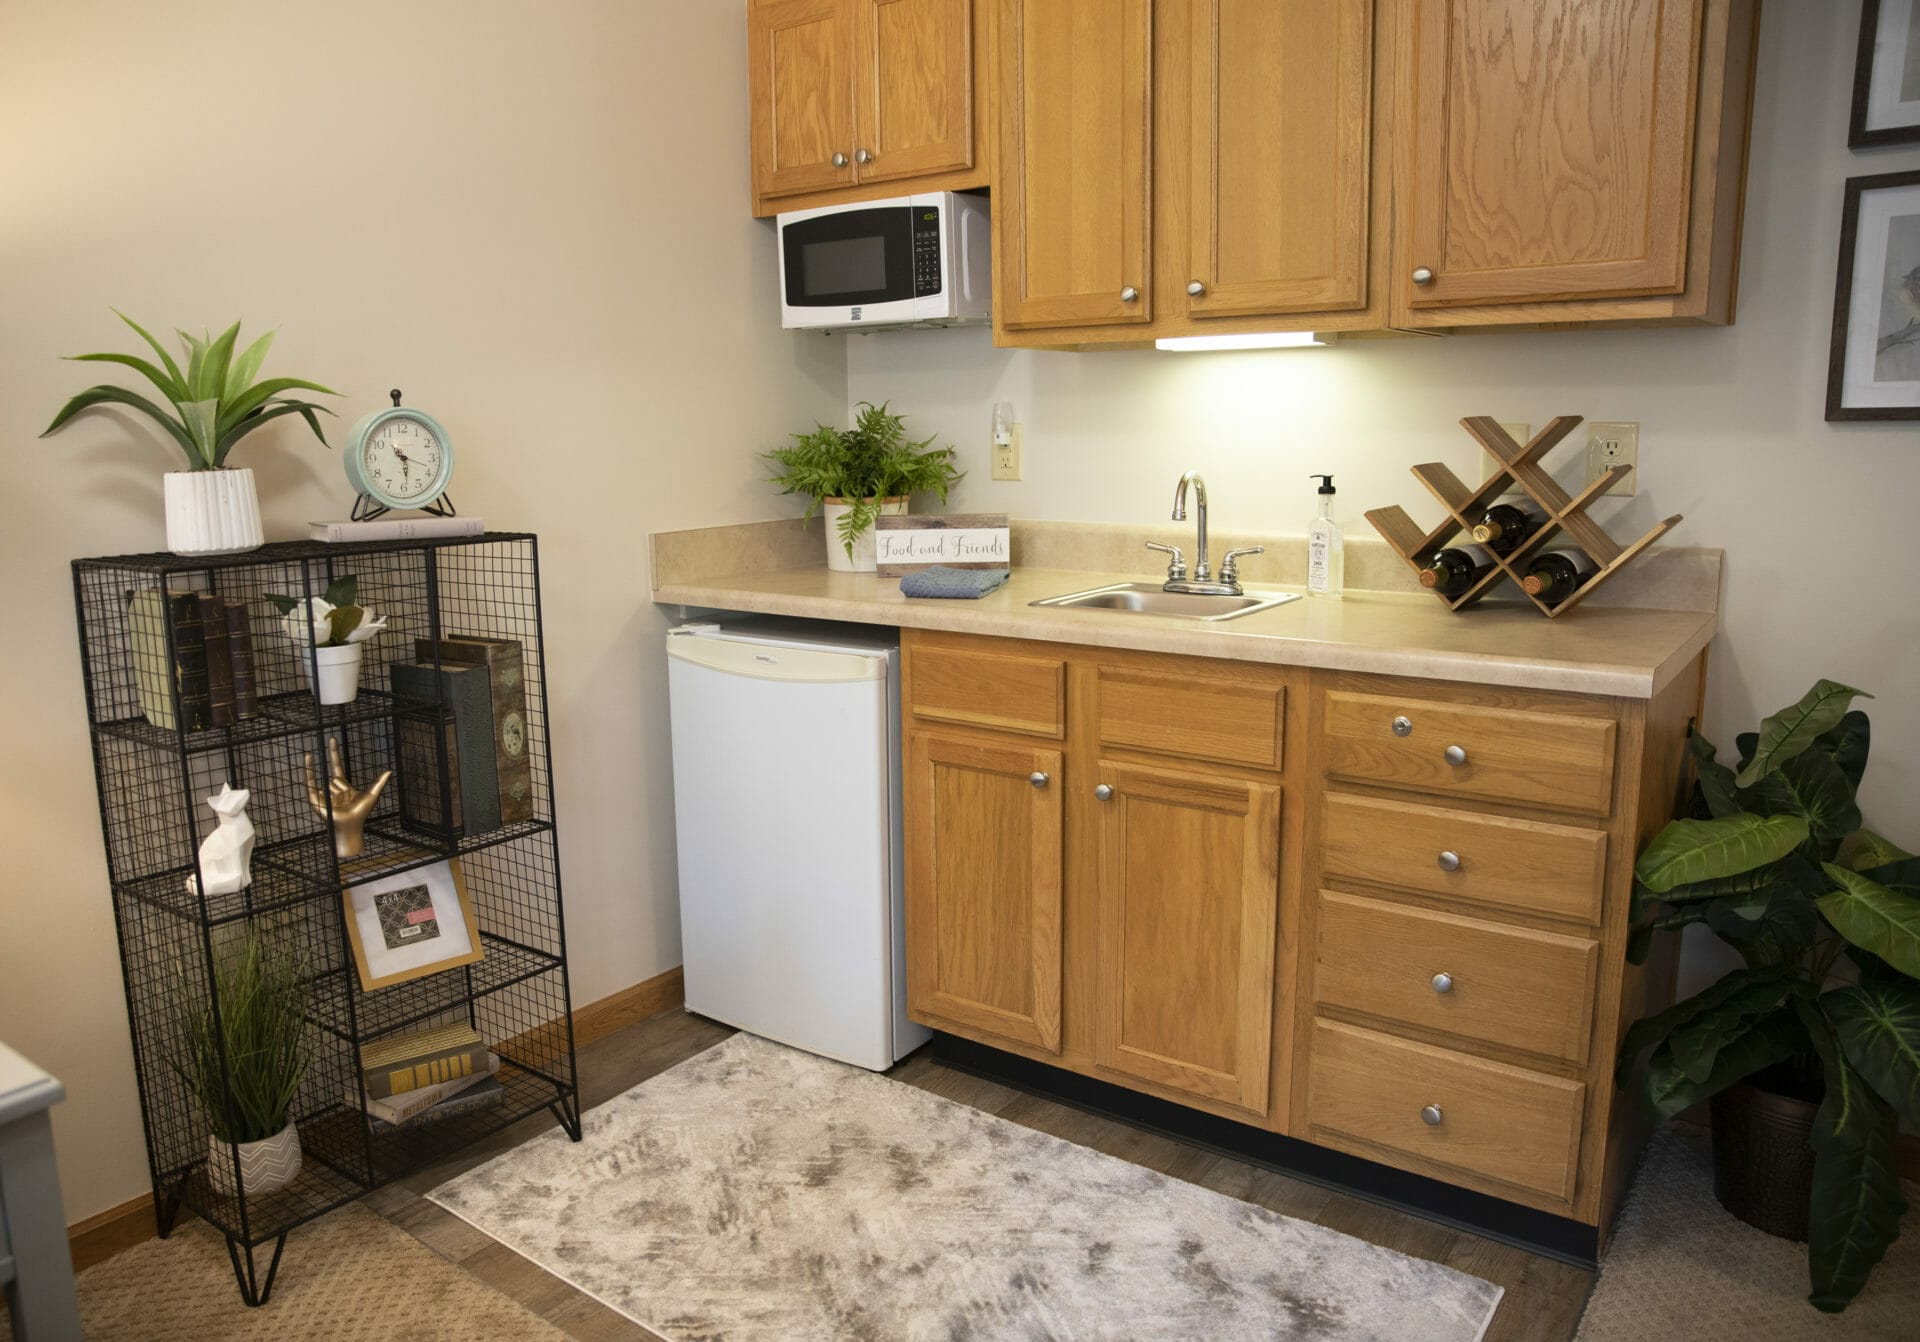 <span  class="uc_style_uc_tiles_grid_image_elementor_uc_items_attribute_title" style="color:#000000;">A kitchenette with a dishwasher, microwave and sink</span>